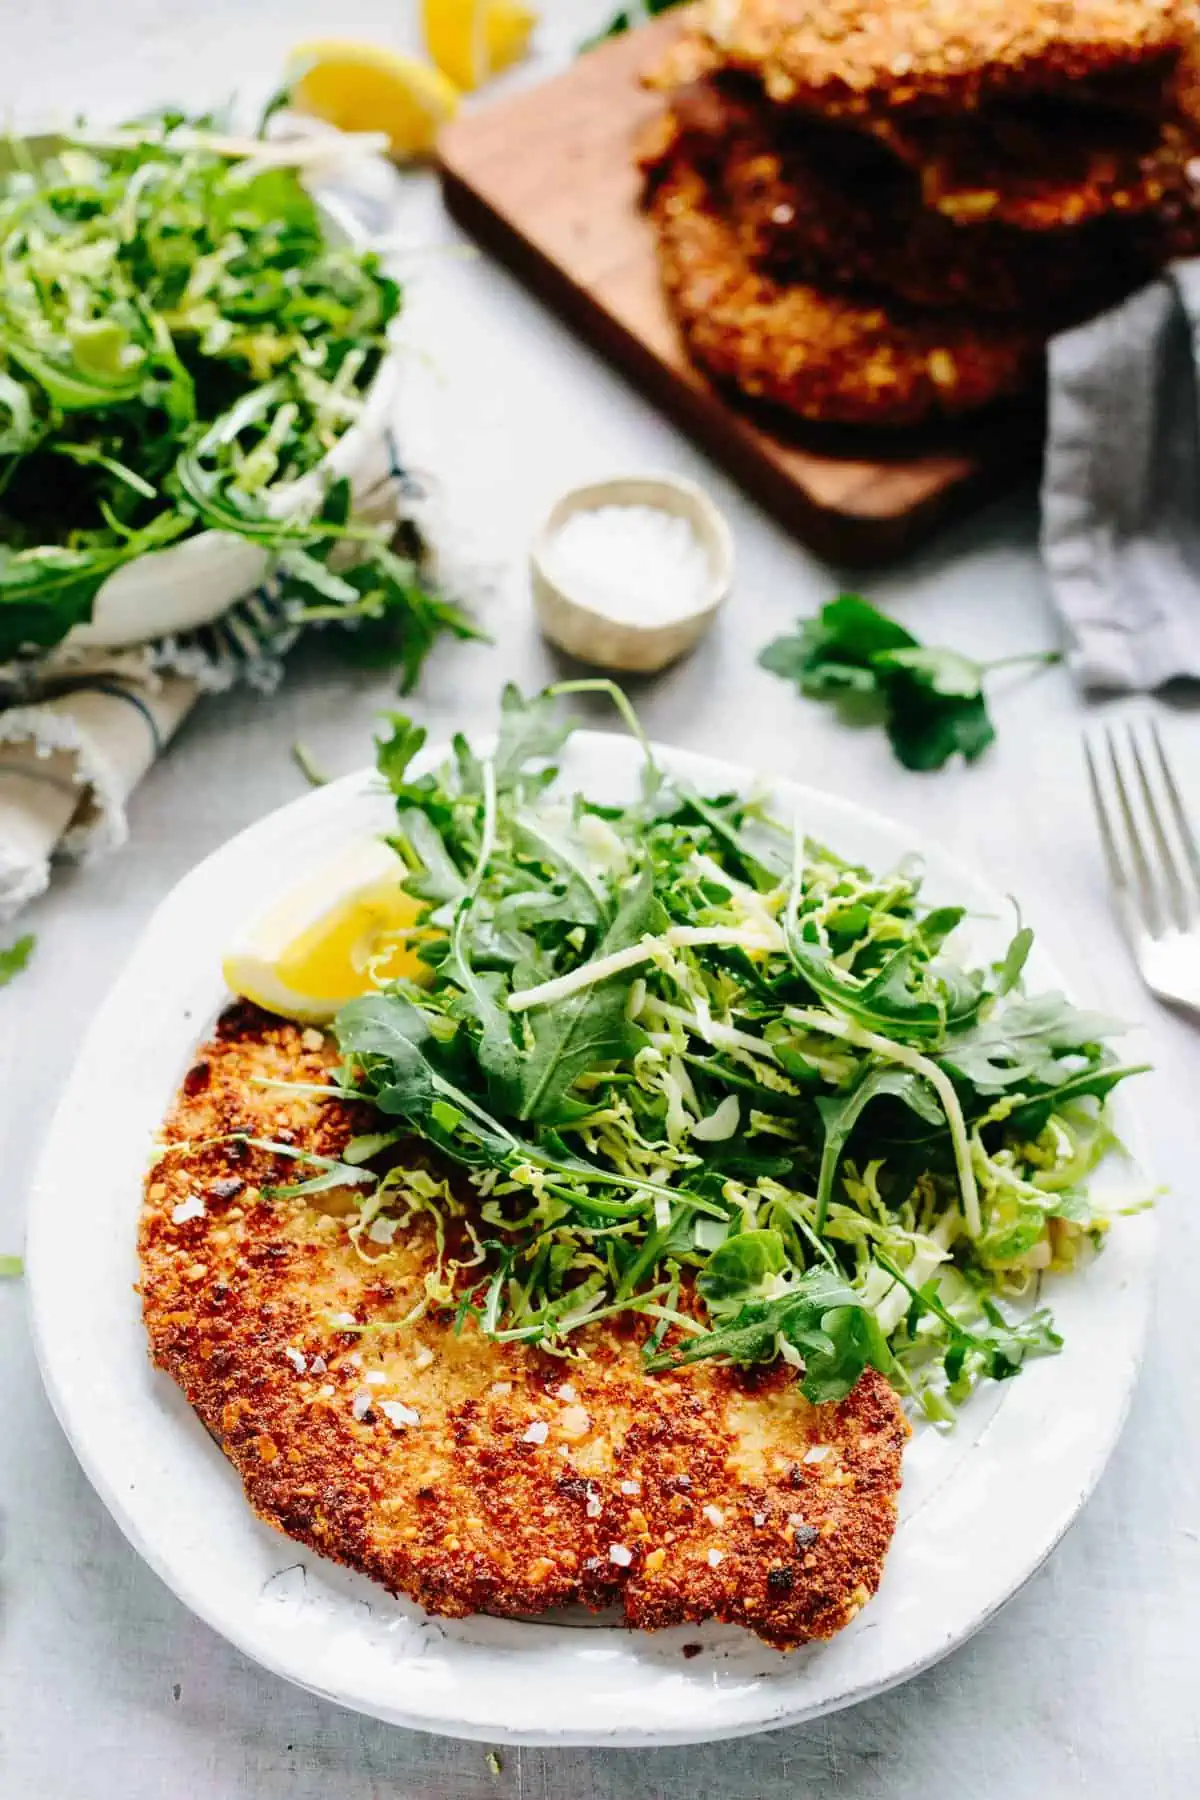 Vertical shot of a white dinner plate containing arugula salad and a breaded chicken cutlet.